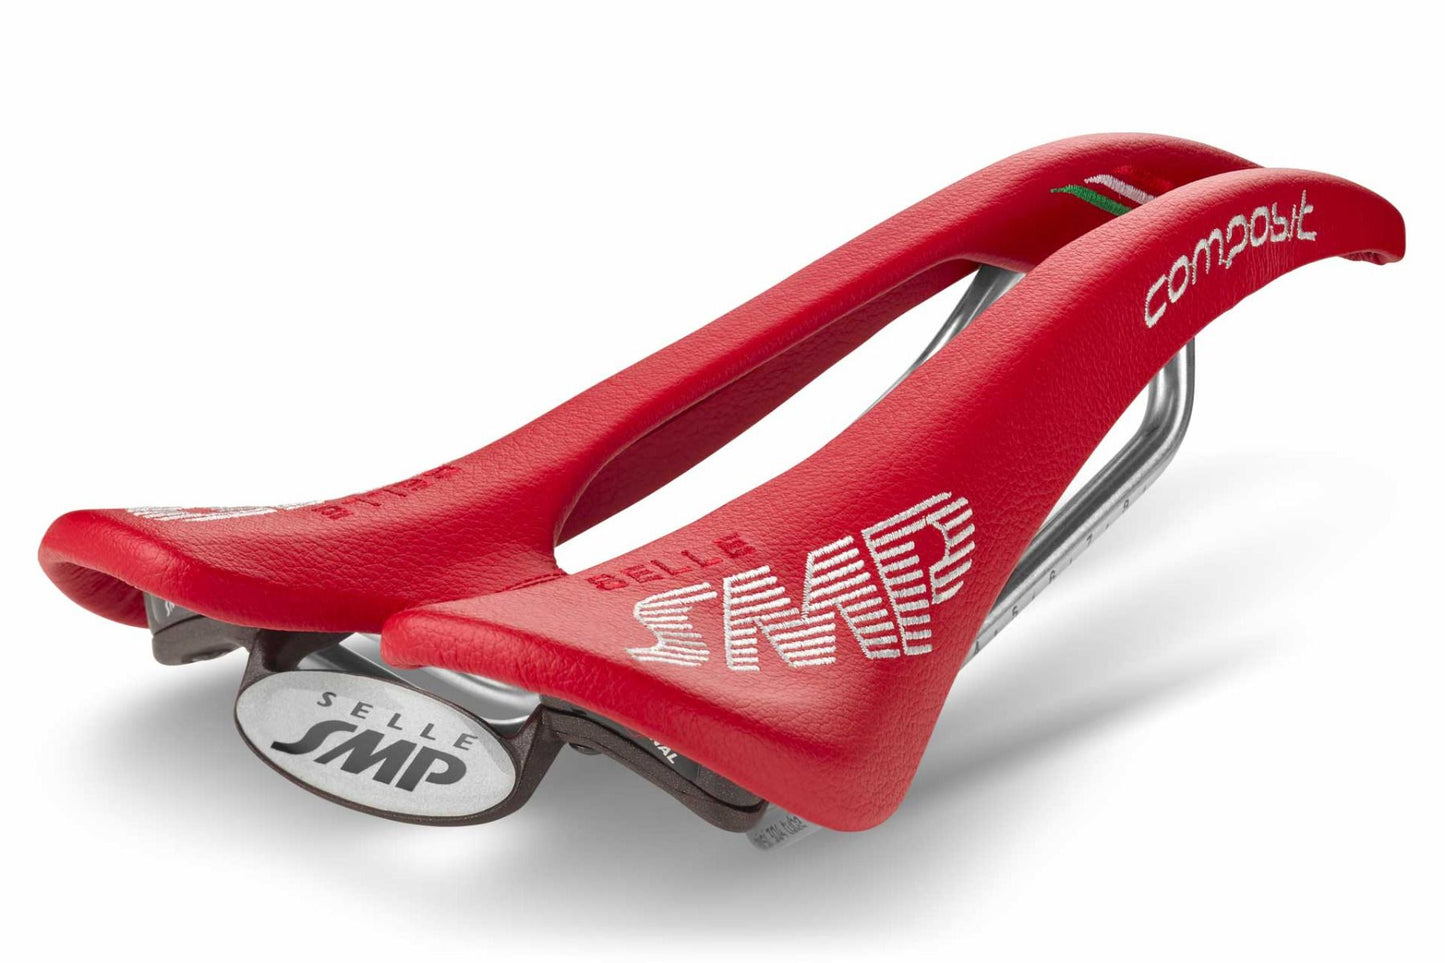 Selle SMP Composit Saddle with Steel Rails (Red)